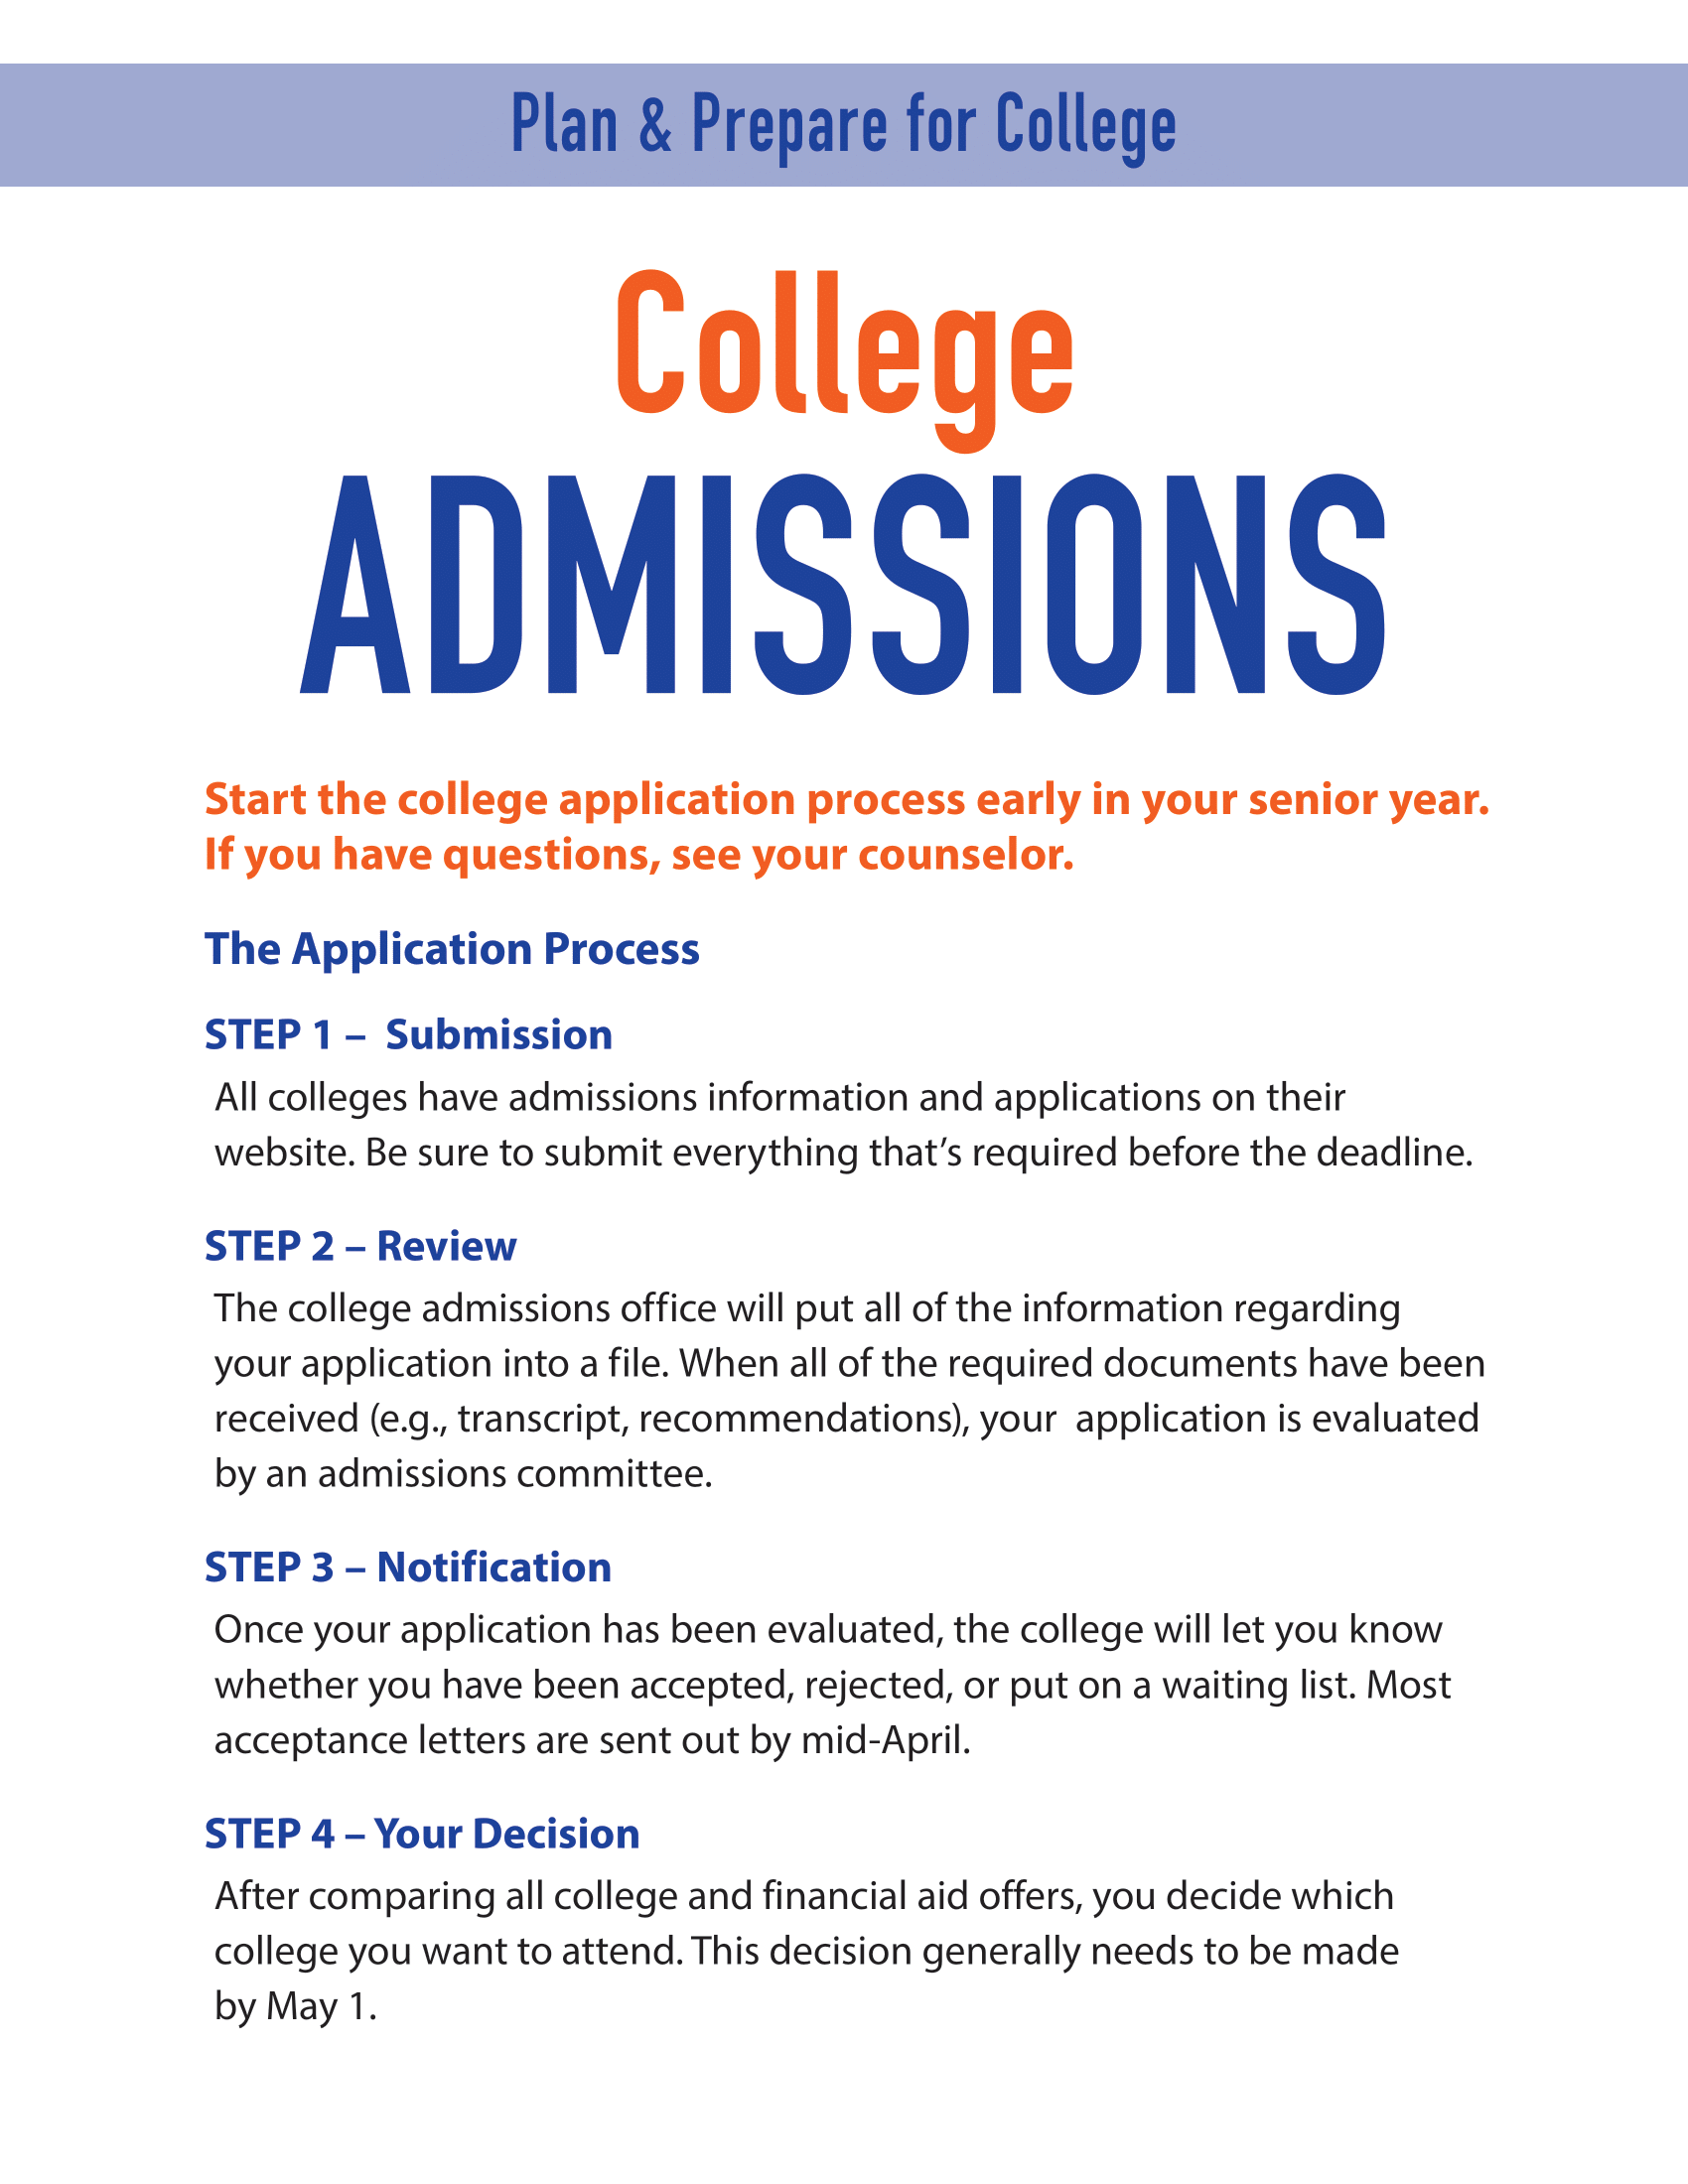 Plan and Prepare for College - College Admissions